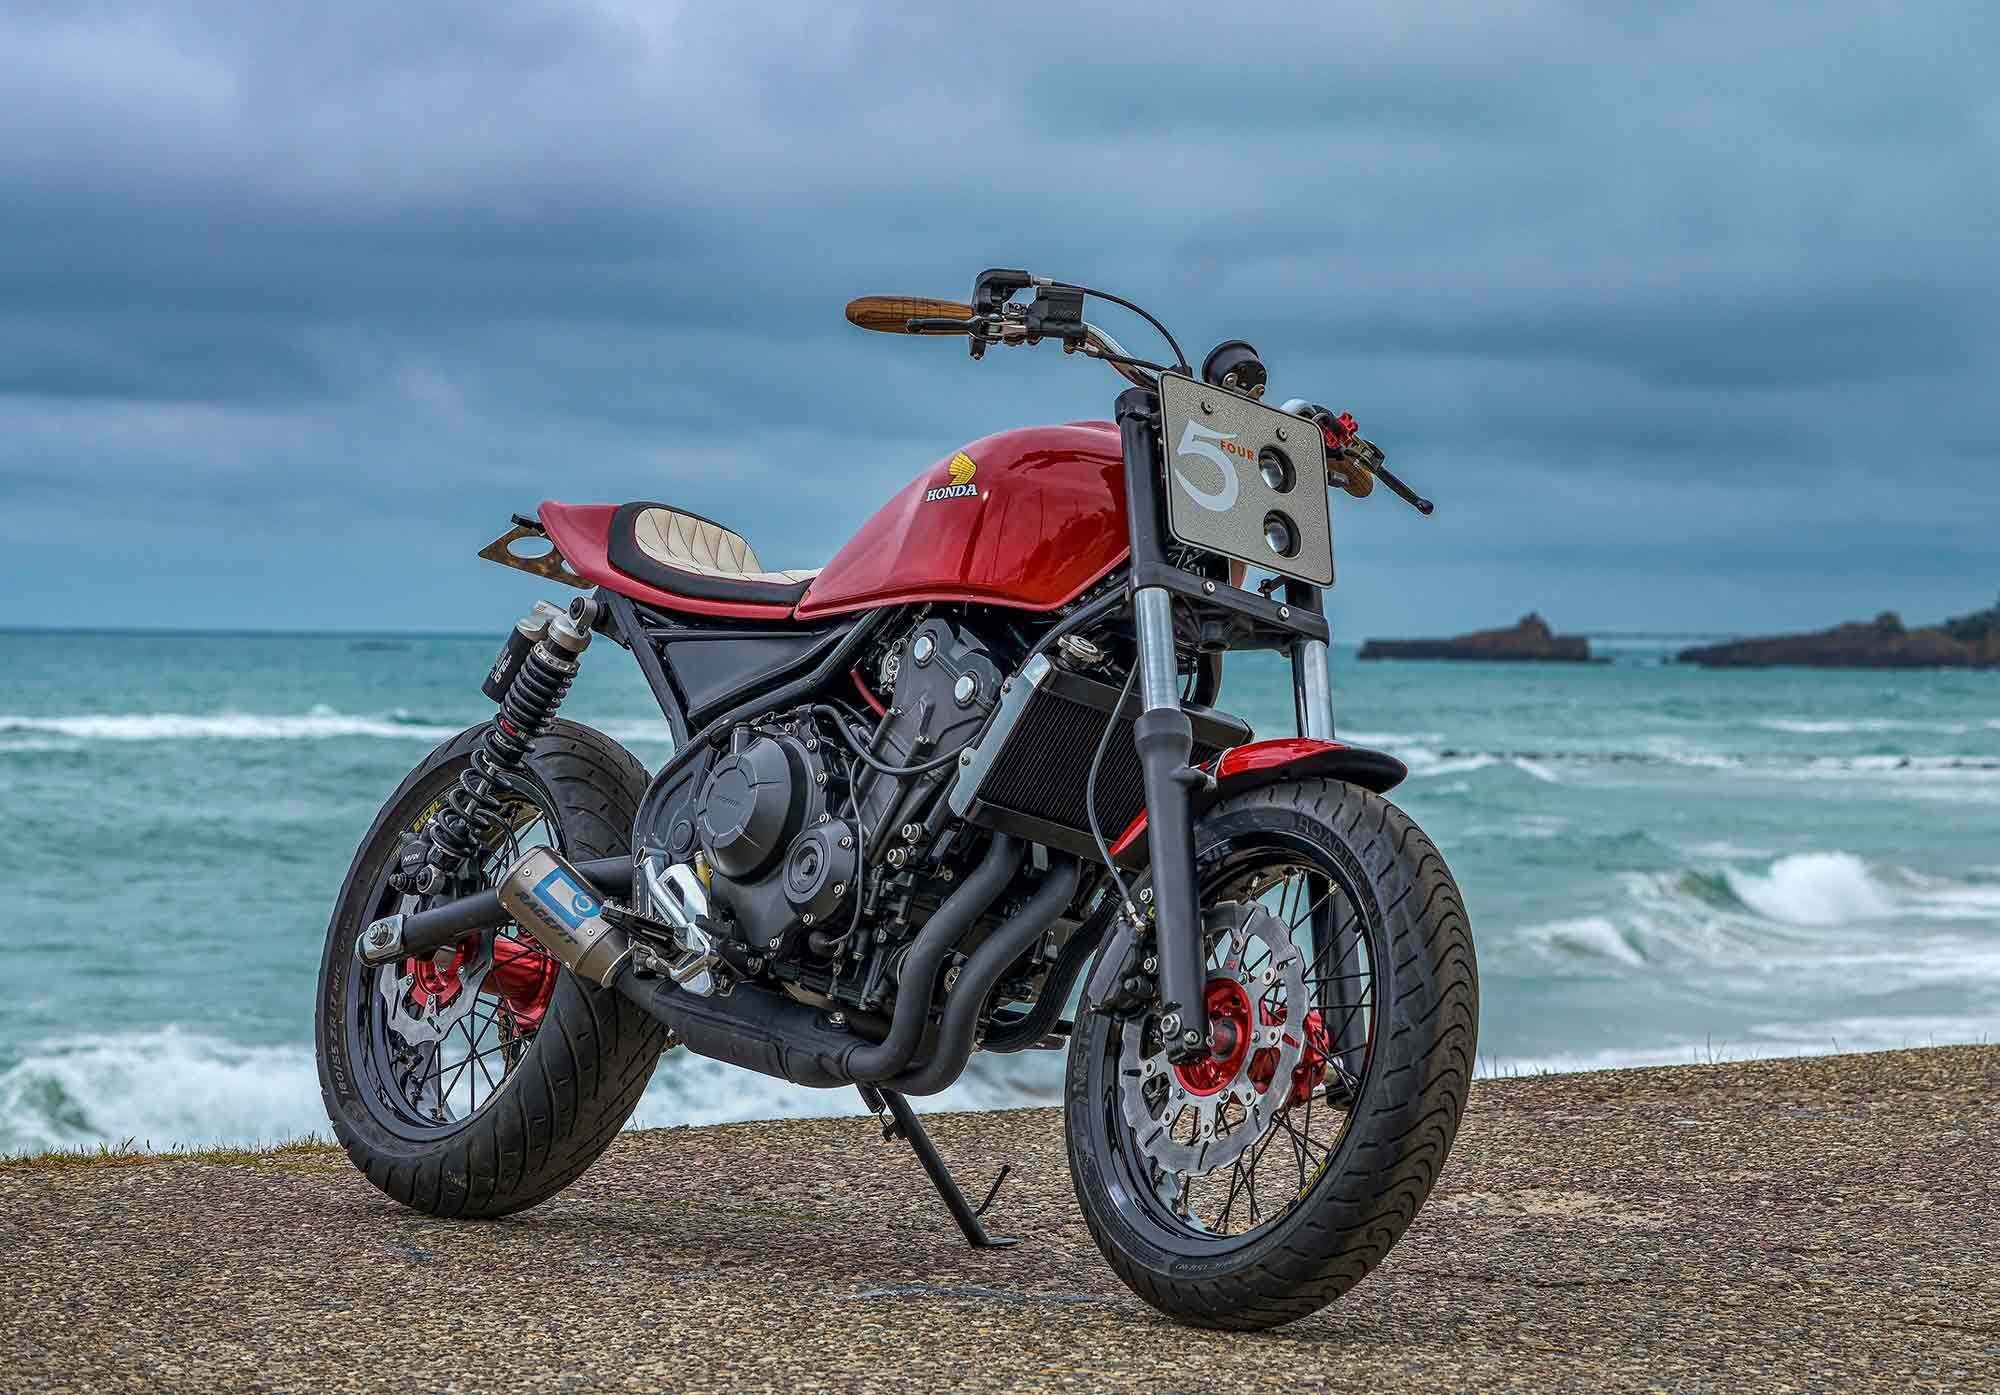 Taking the prize for the Best Scrambler was a coolly modded, streetfightery BMW R 850 R by Bottega Bastarda.